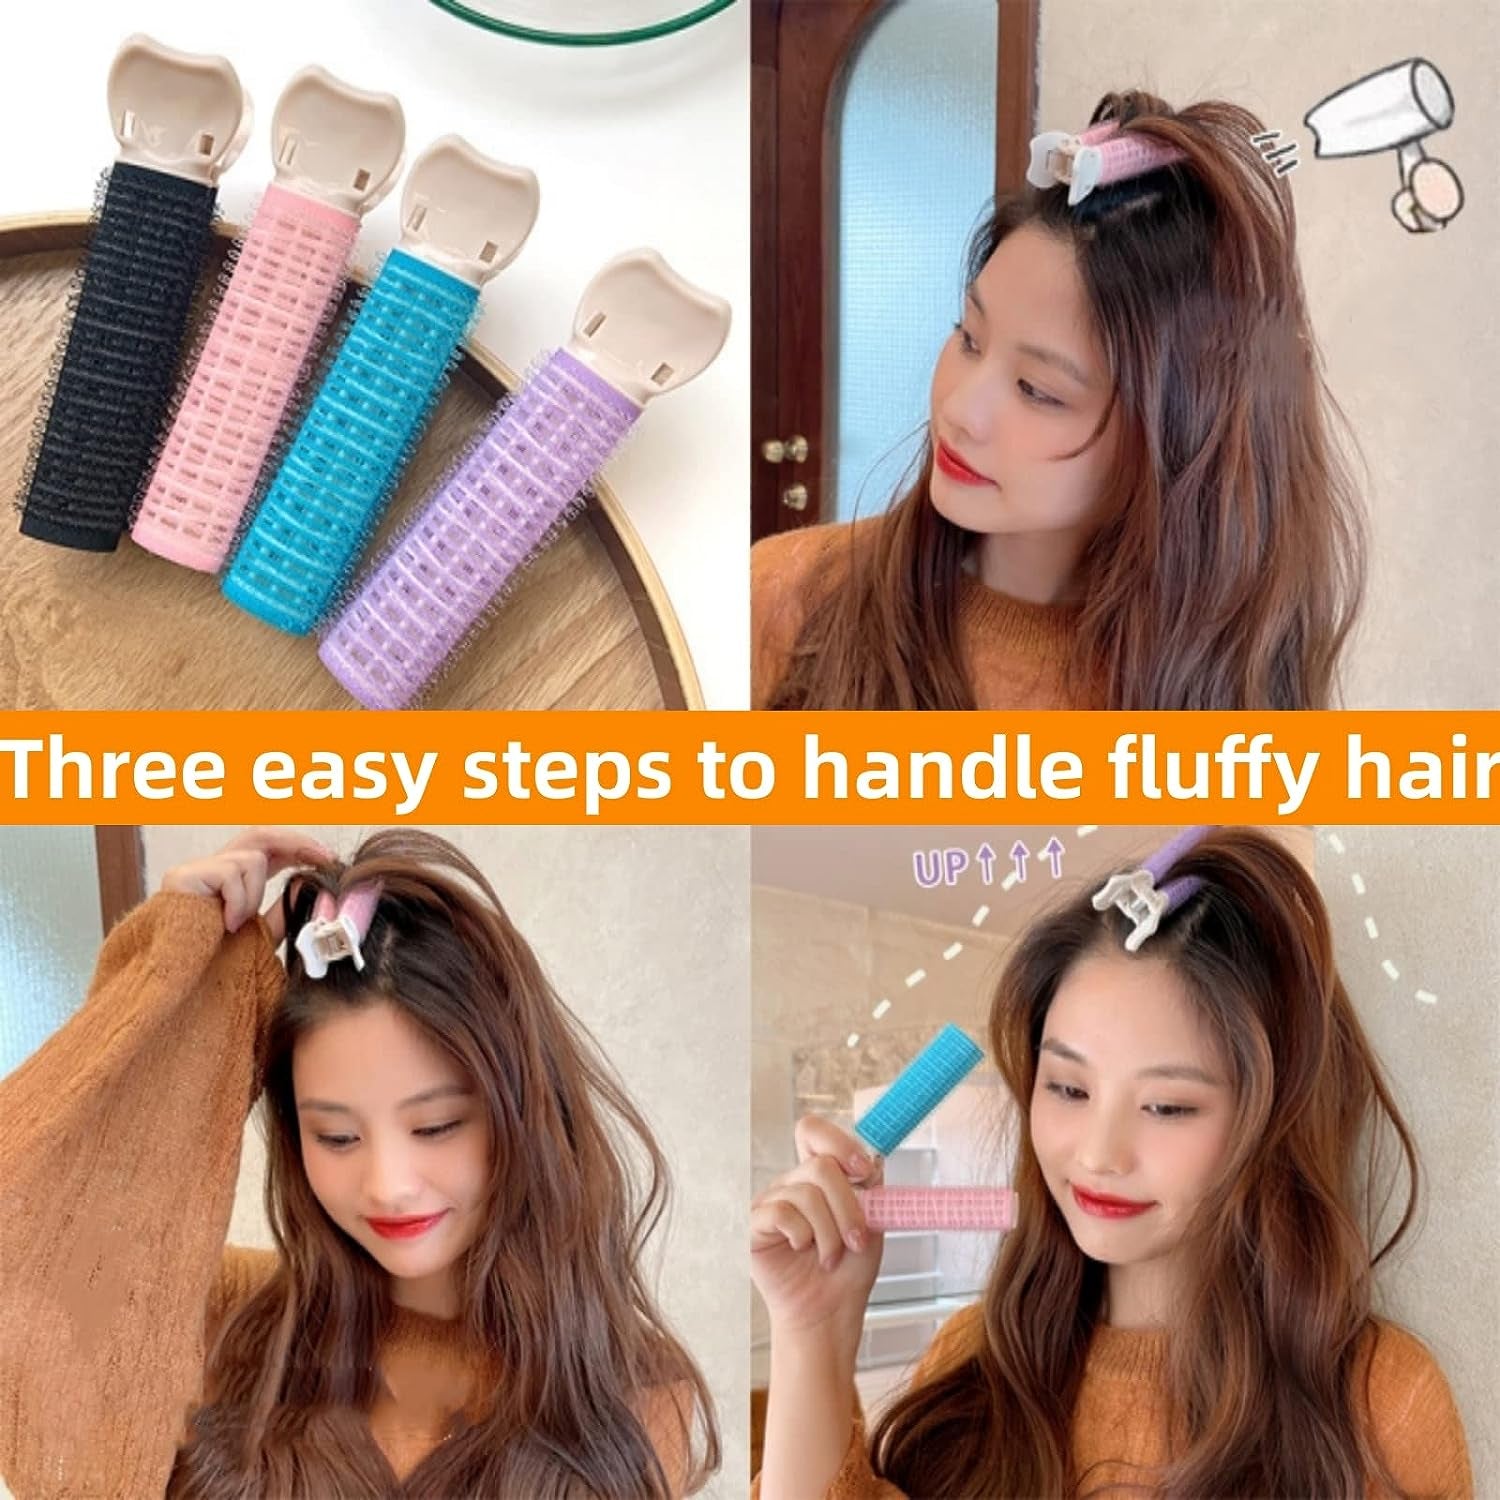 Volumizing Hair Clips, 10PCS Velcro Clips for Hair, Root Clips for Hair Volume, Fluffy Hair Volumizer Clips, Instant Hair Volumizing Clips for Women. (Black, Pink, Blue, Purple,Red)